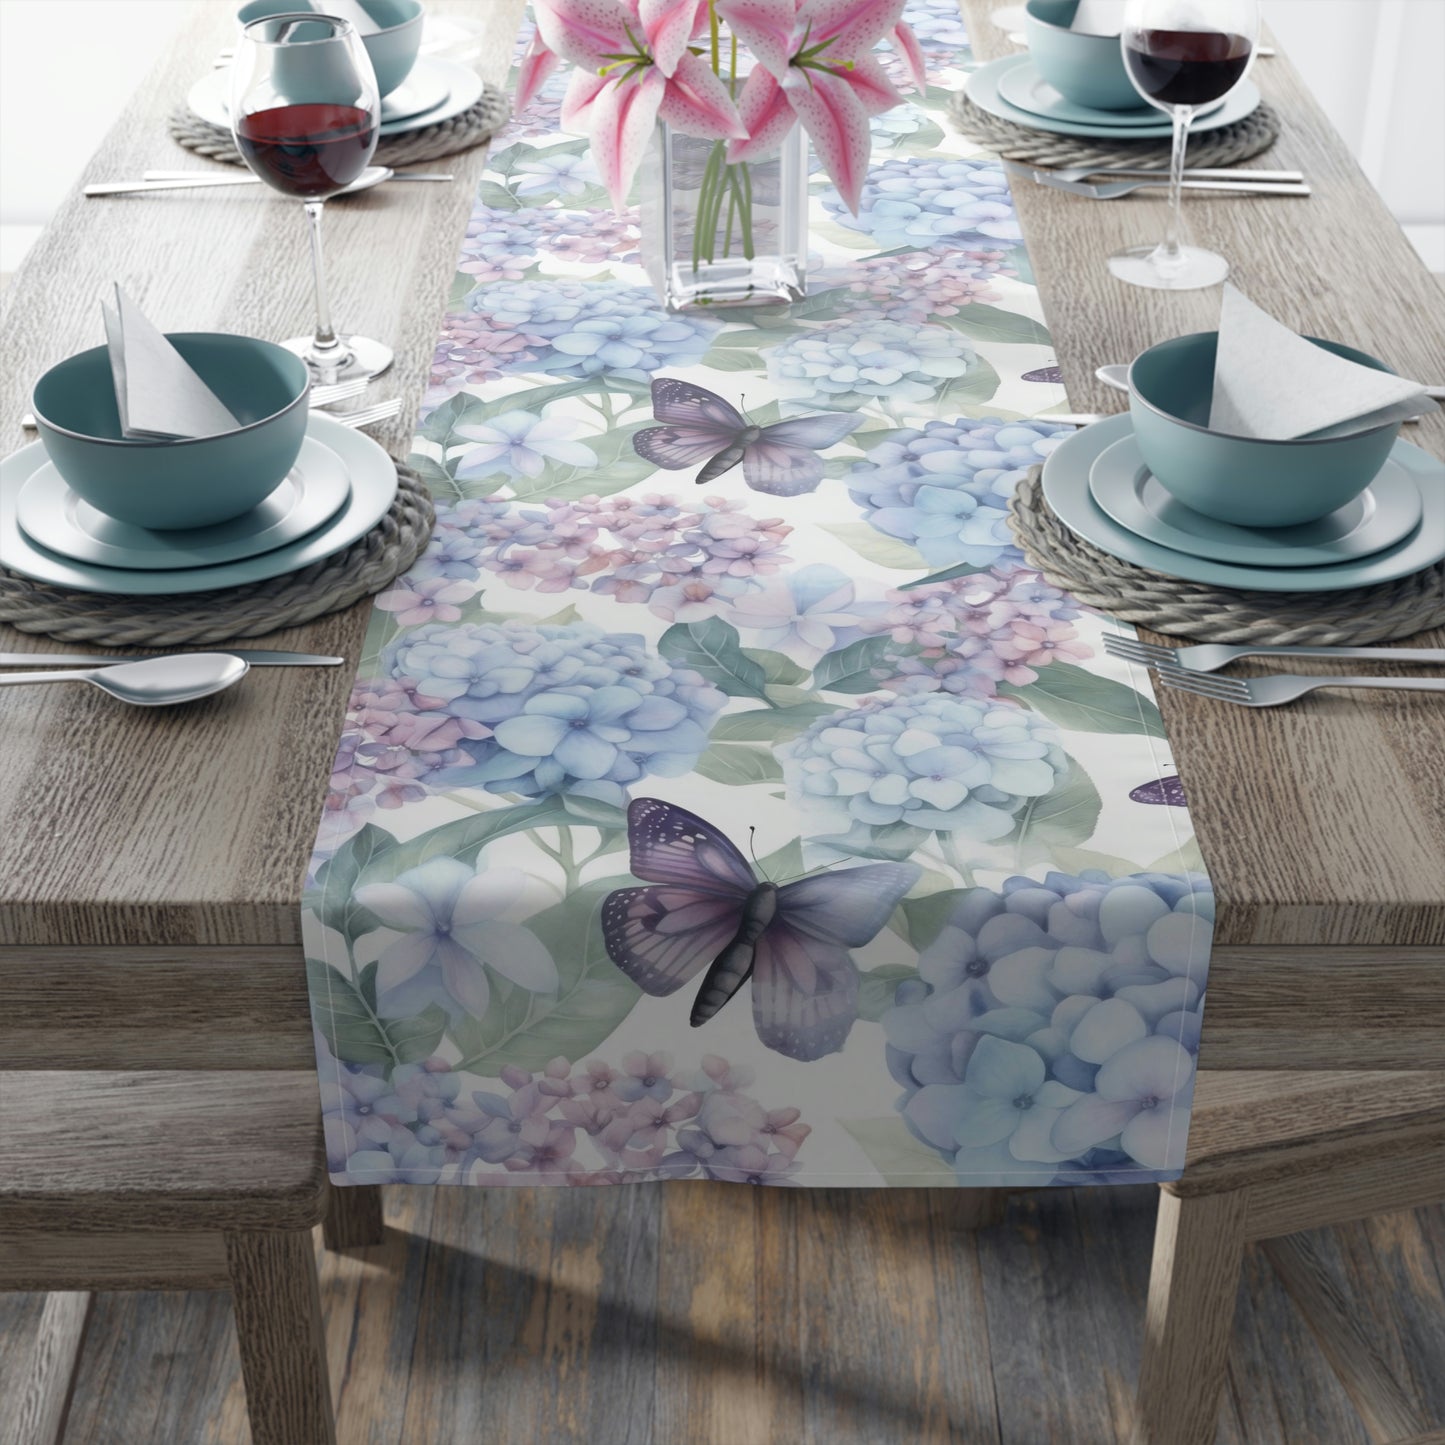 summer butterfly and hydrangea table runner in blue and purple flower print